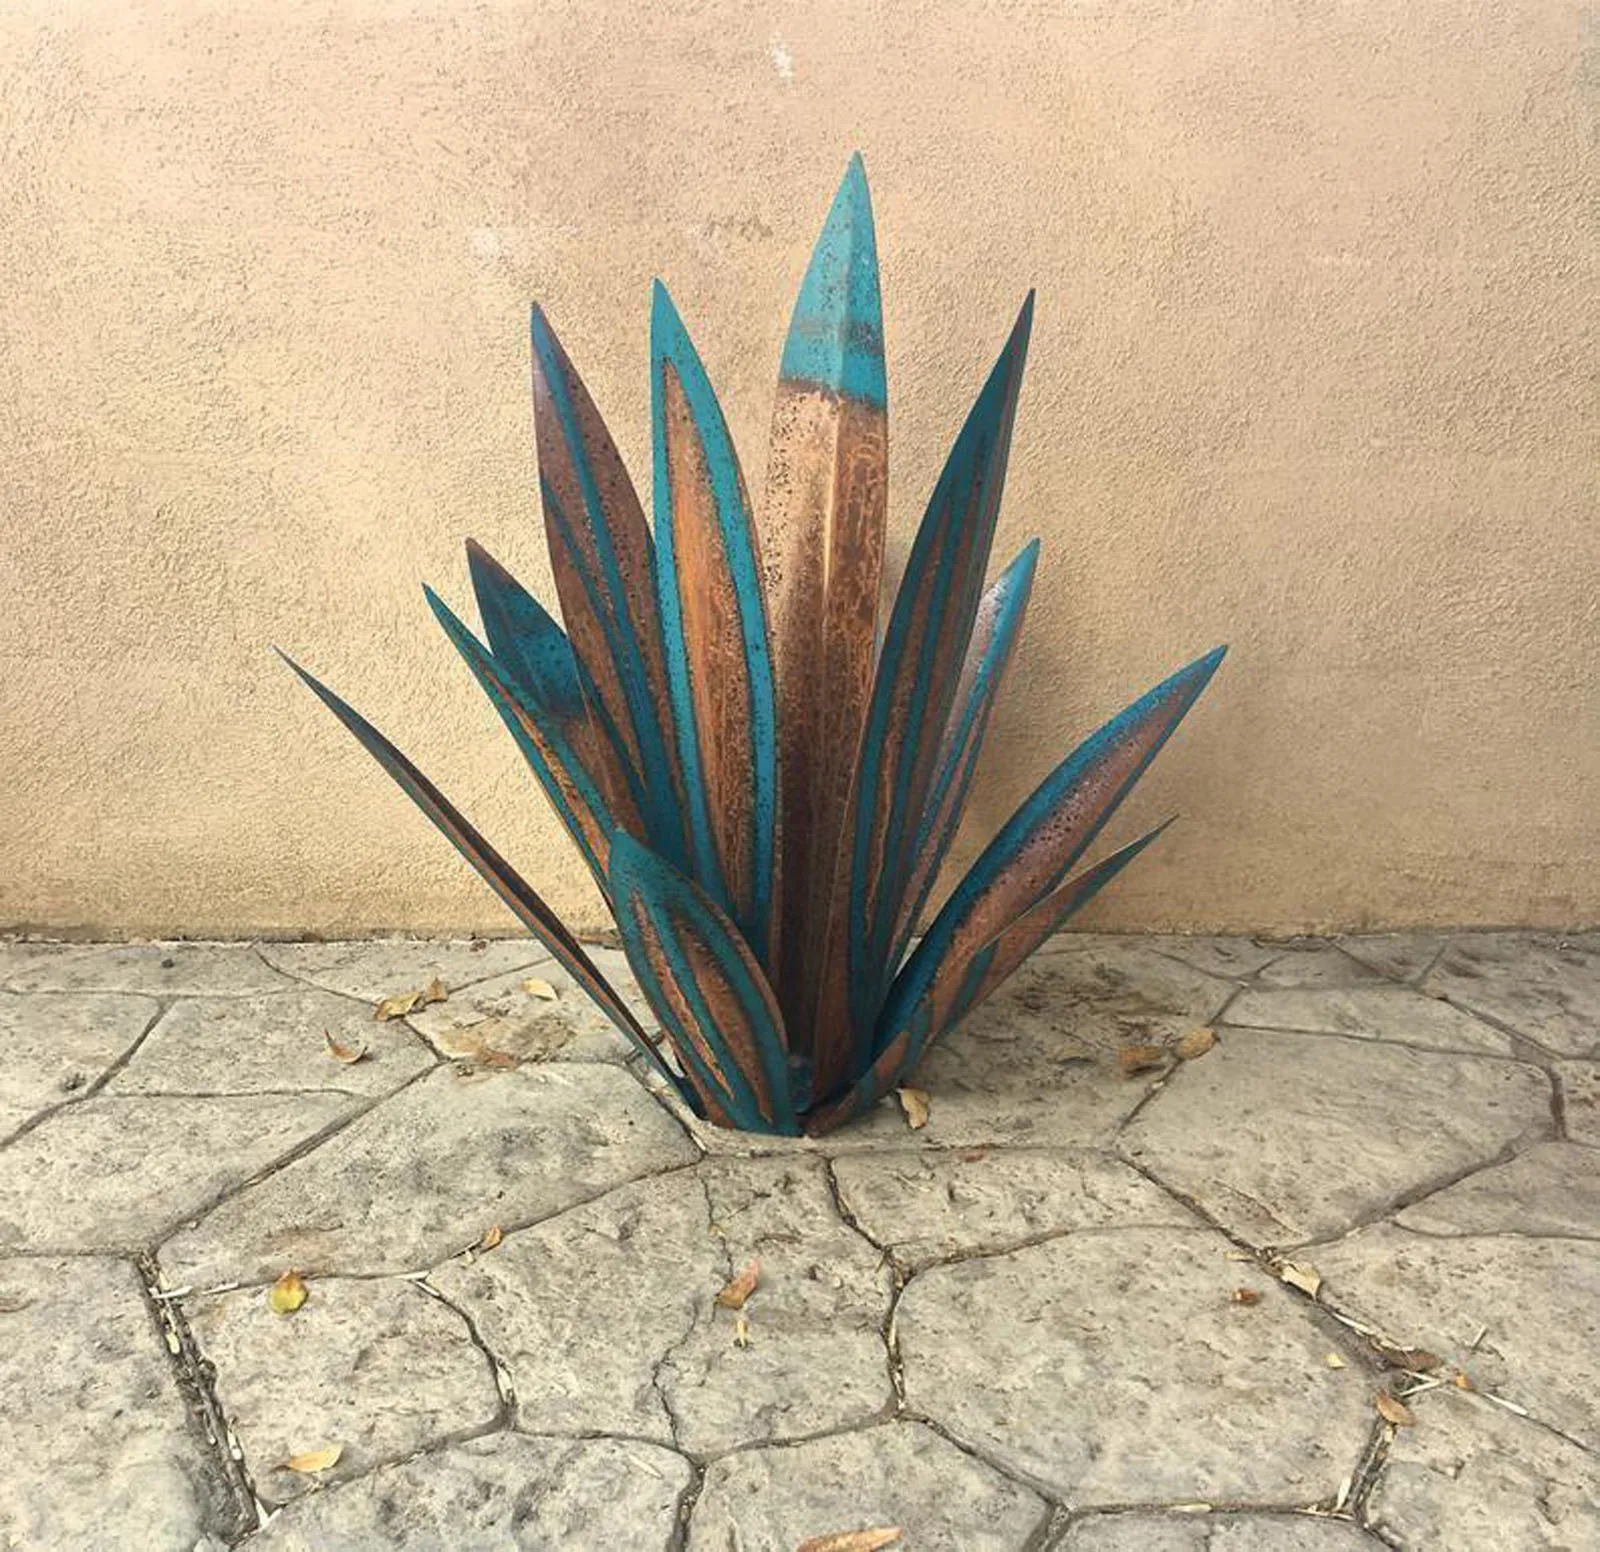 DIY Metal Art Tequila Rustic Sculpture Home Garden Yard Decoration With 9 leaves